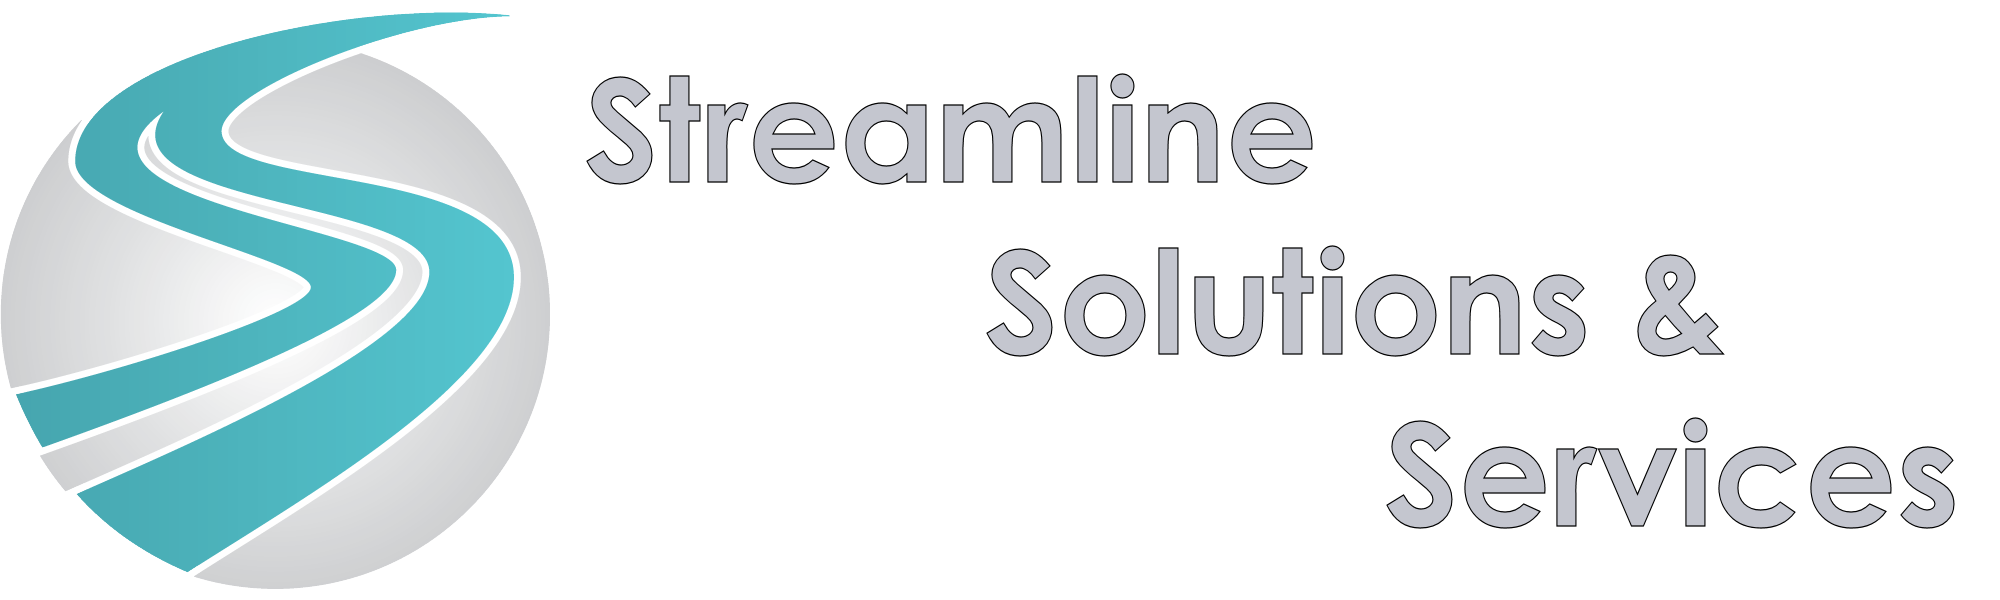 Streamline Solutions.png